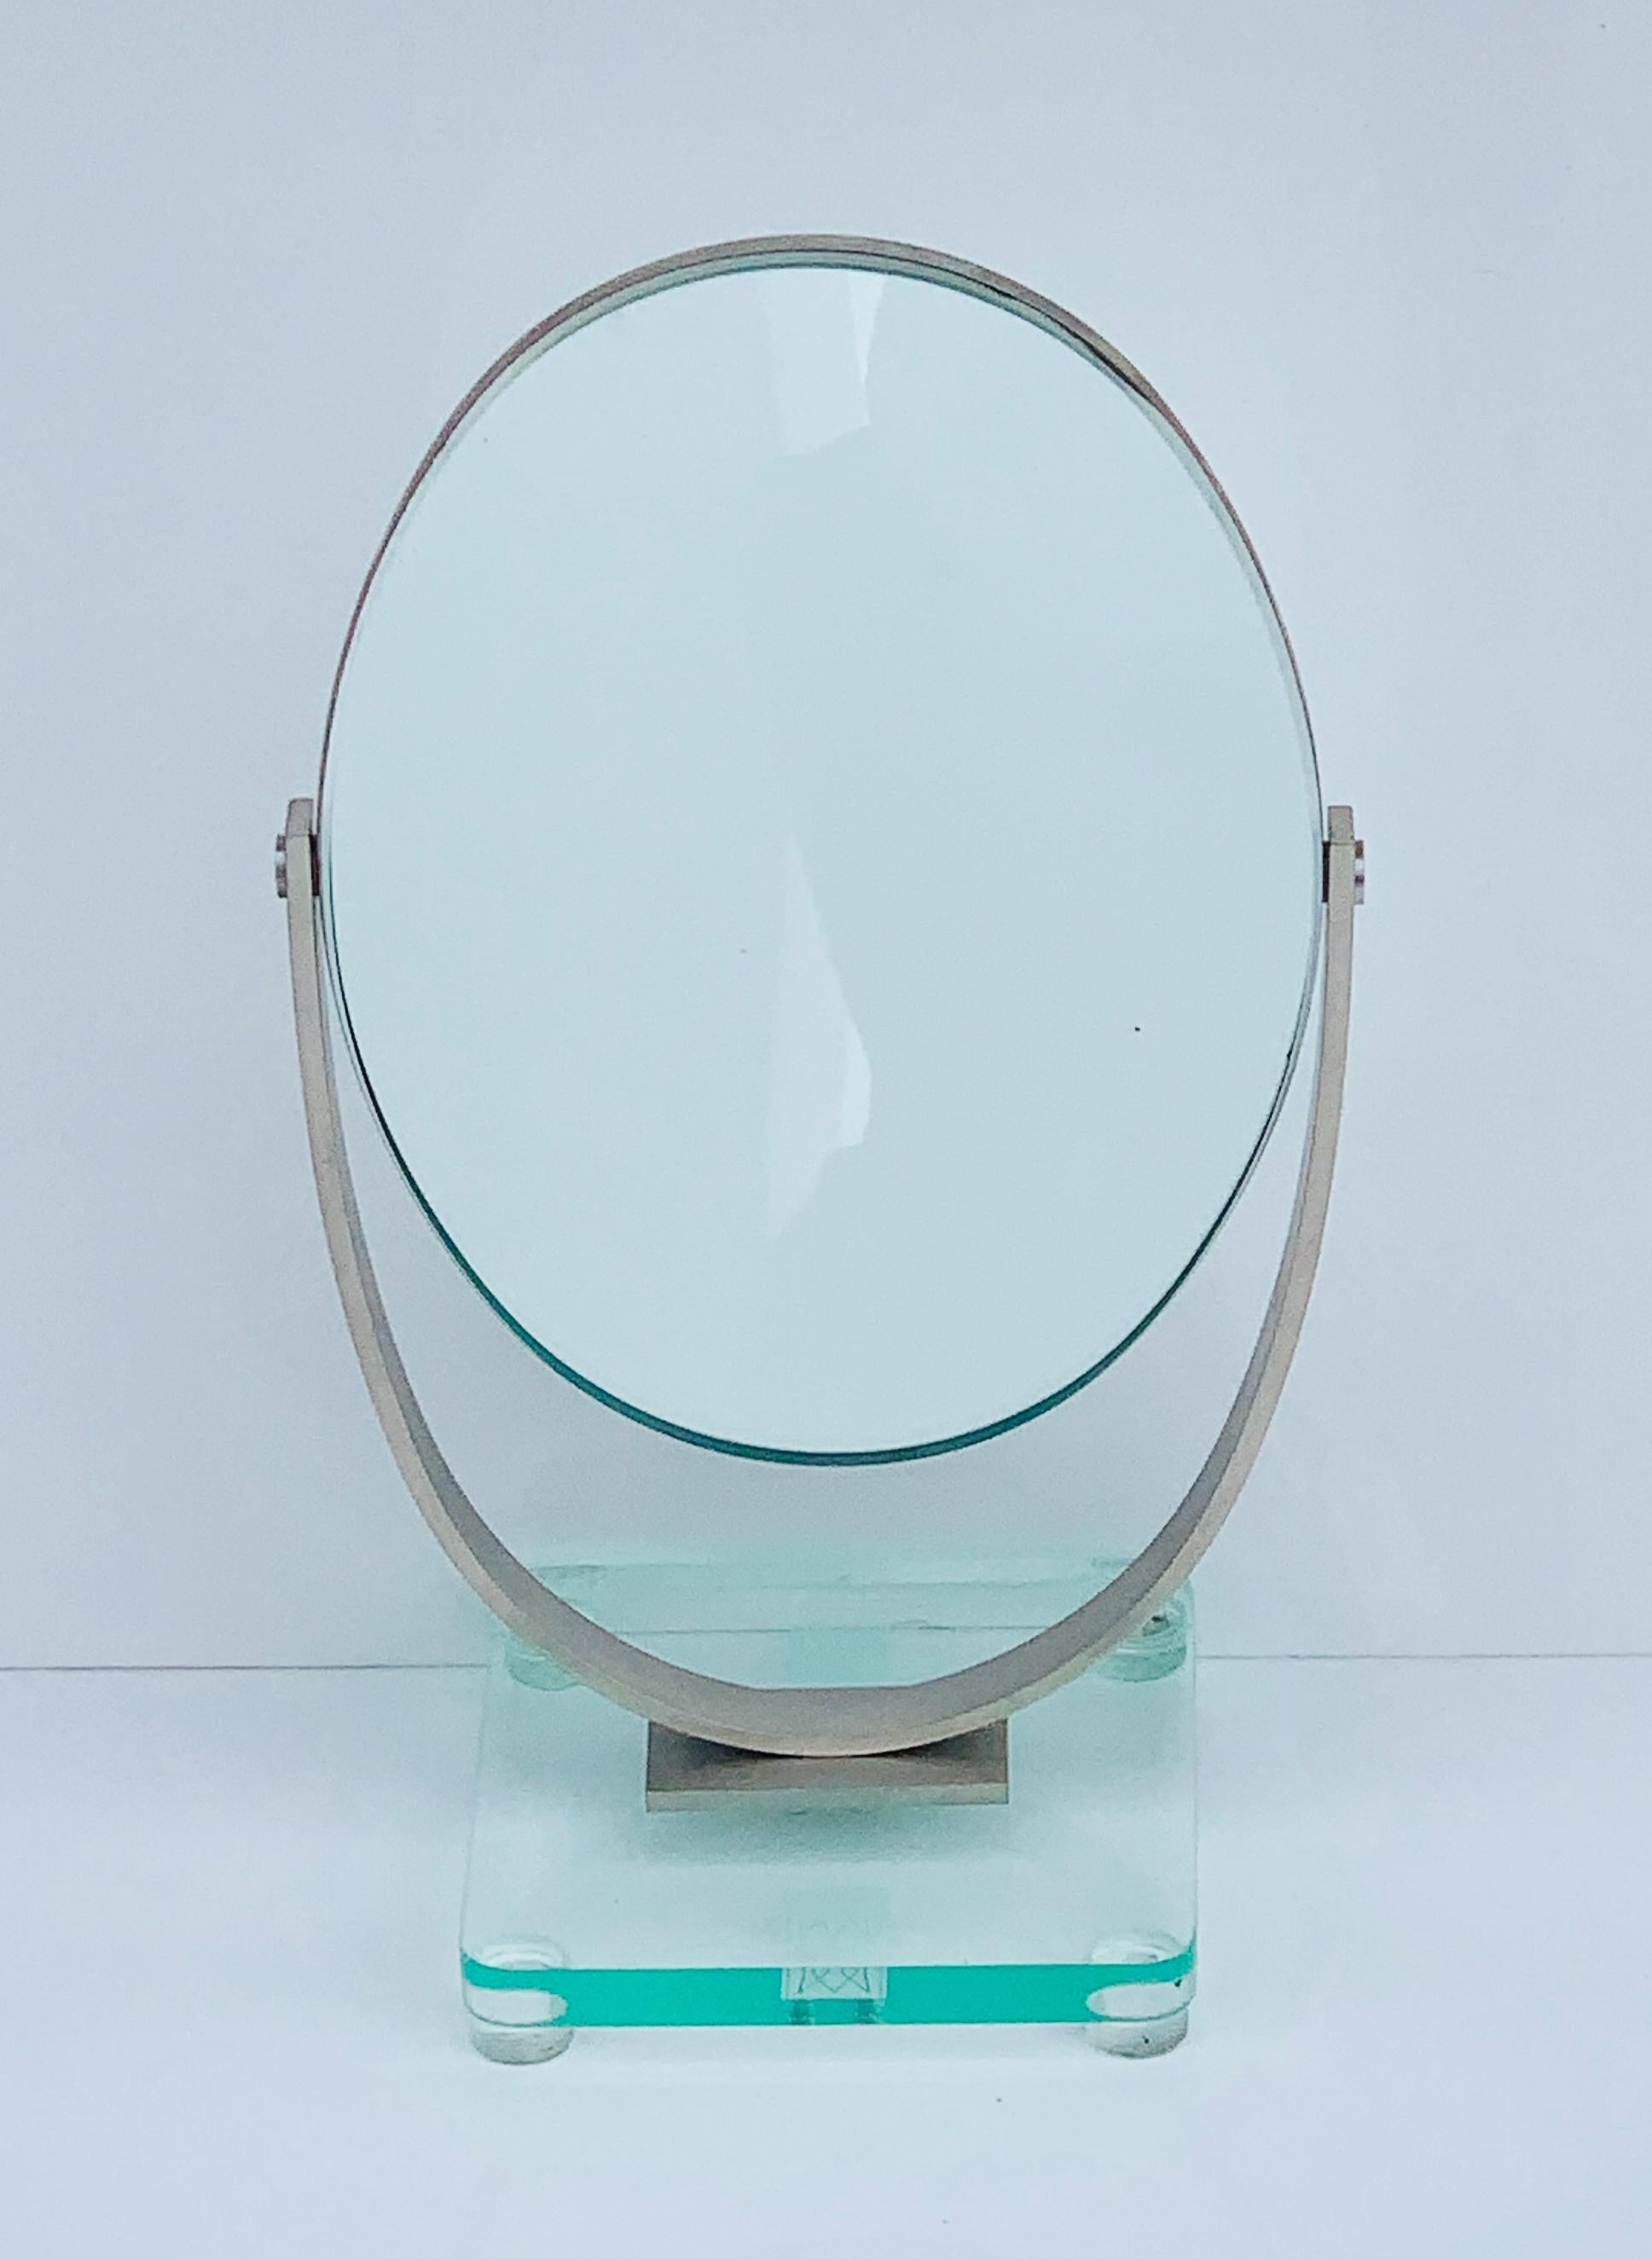 Introducing the Double Sided Vanity Mirror by Charles Hollis Jones, USA 1970's - a timeless piece that seamlessly combines functionality and elegance. This exquisite mirror is the perfect addition to any vanity or dressing area, exuding a touch of